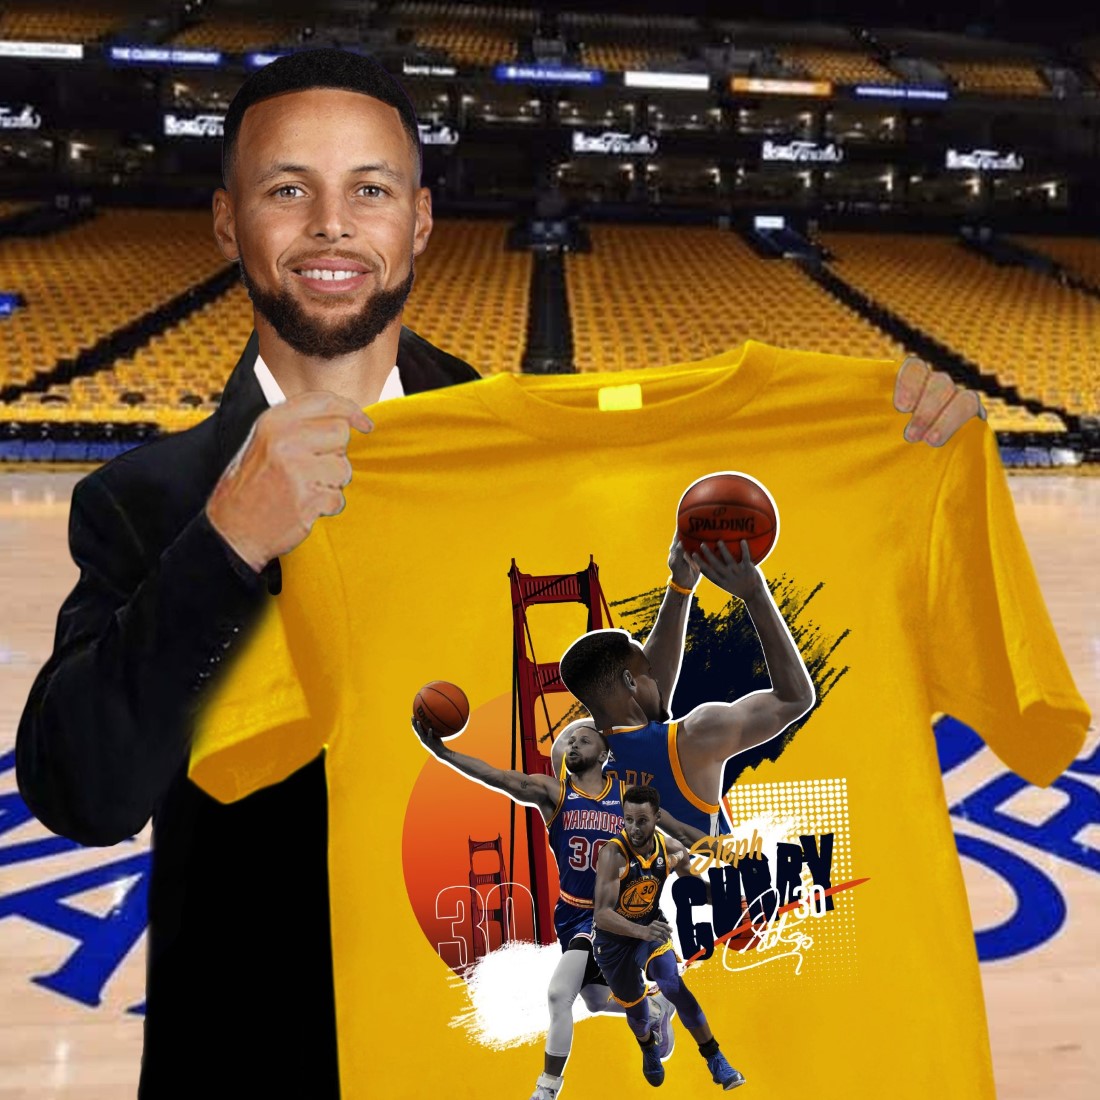 Stephen Curry 30 Golden State Warriors Signed Shirt